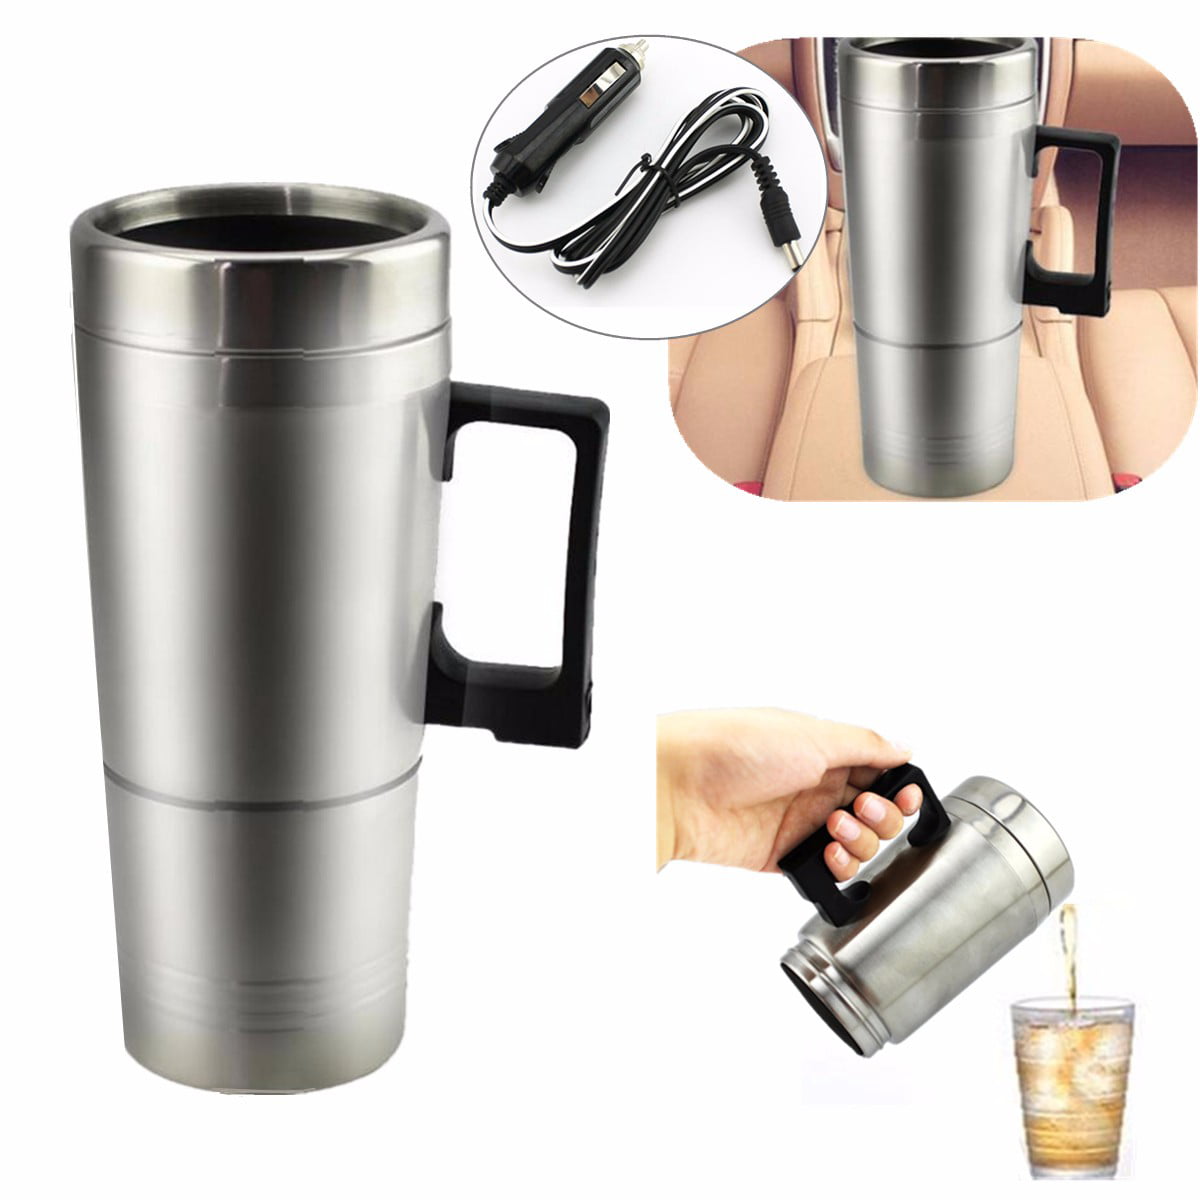 12V Car Heating Cup Simple 12V/24V 300ml Portable in Car Coffee Maker Tea Pot Vehicle Heating Cup Lid Outdoor Water Bottle 